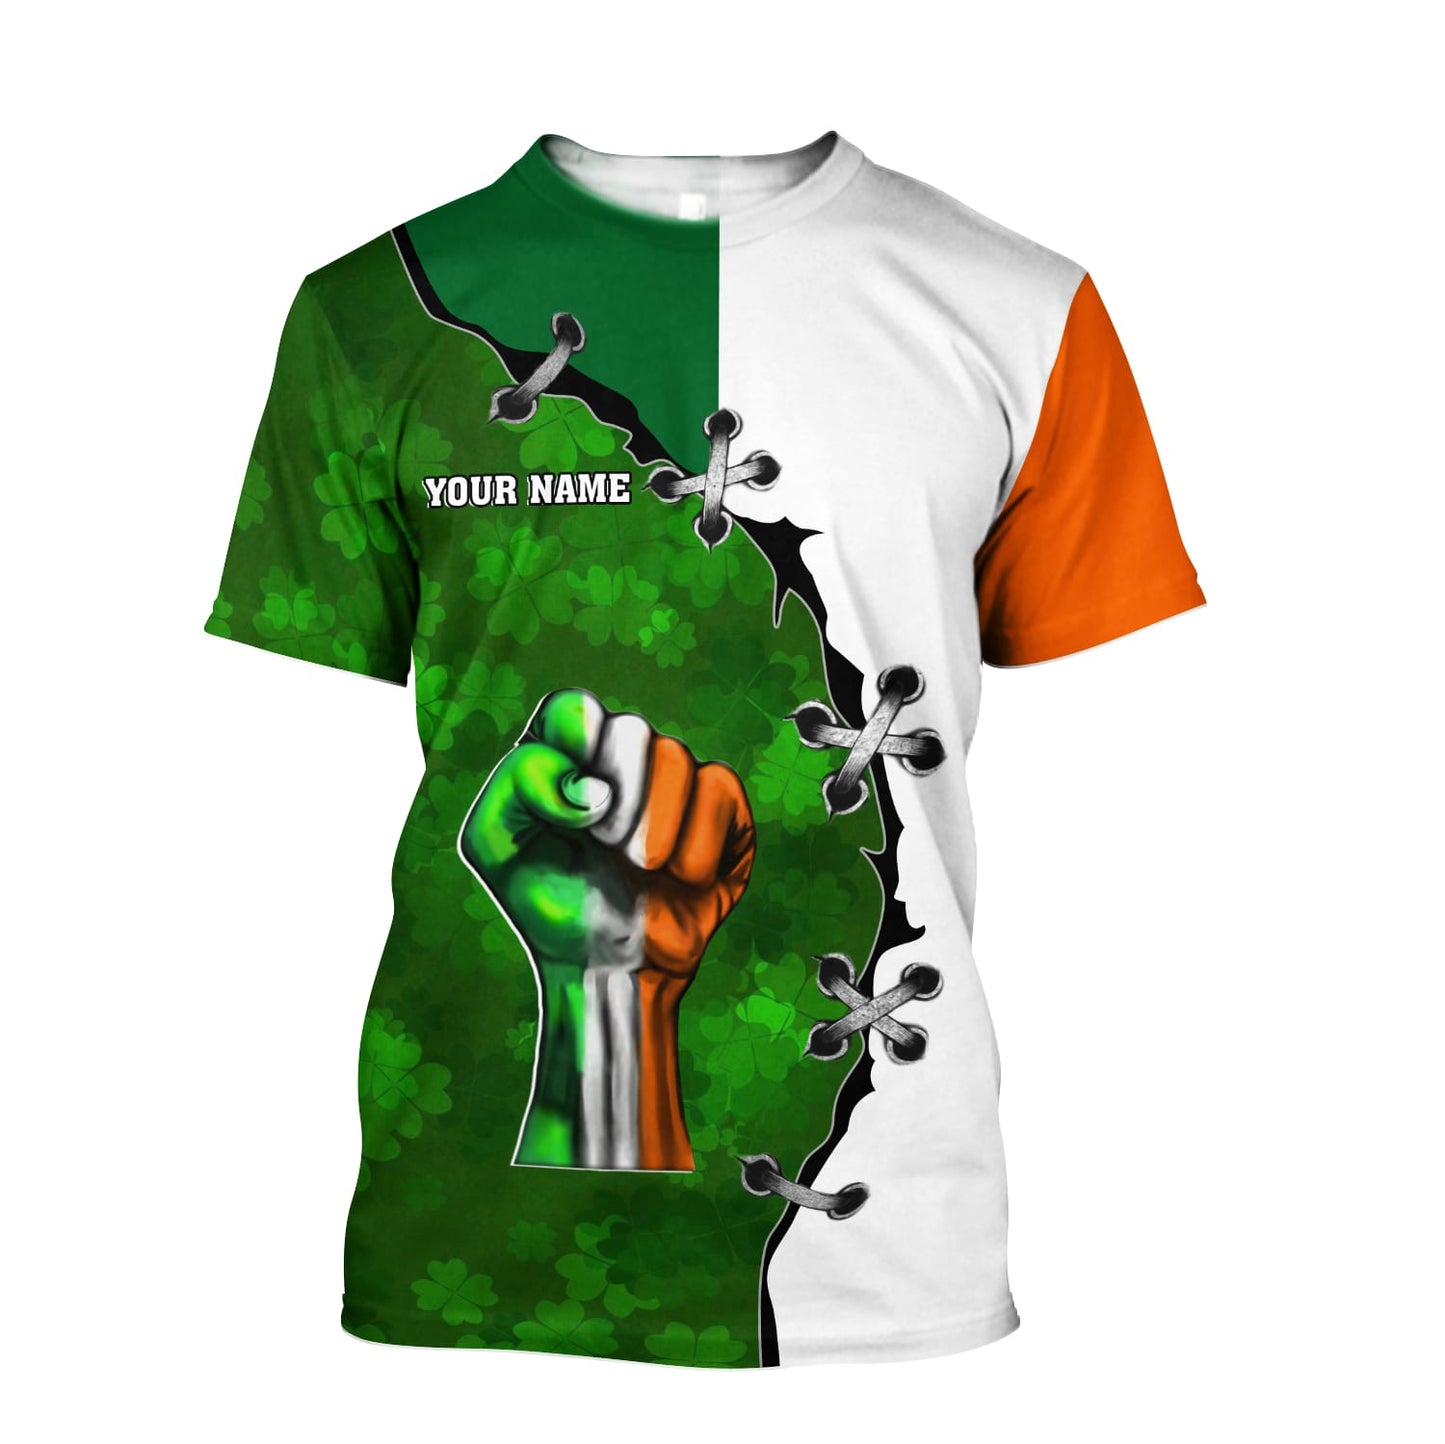 Personalized Irish Pride St Patrick Day 3d Printed Shirts - St Patricks Day 3D Shirts for Men & Women